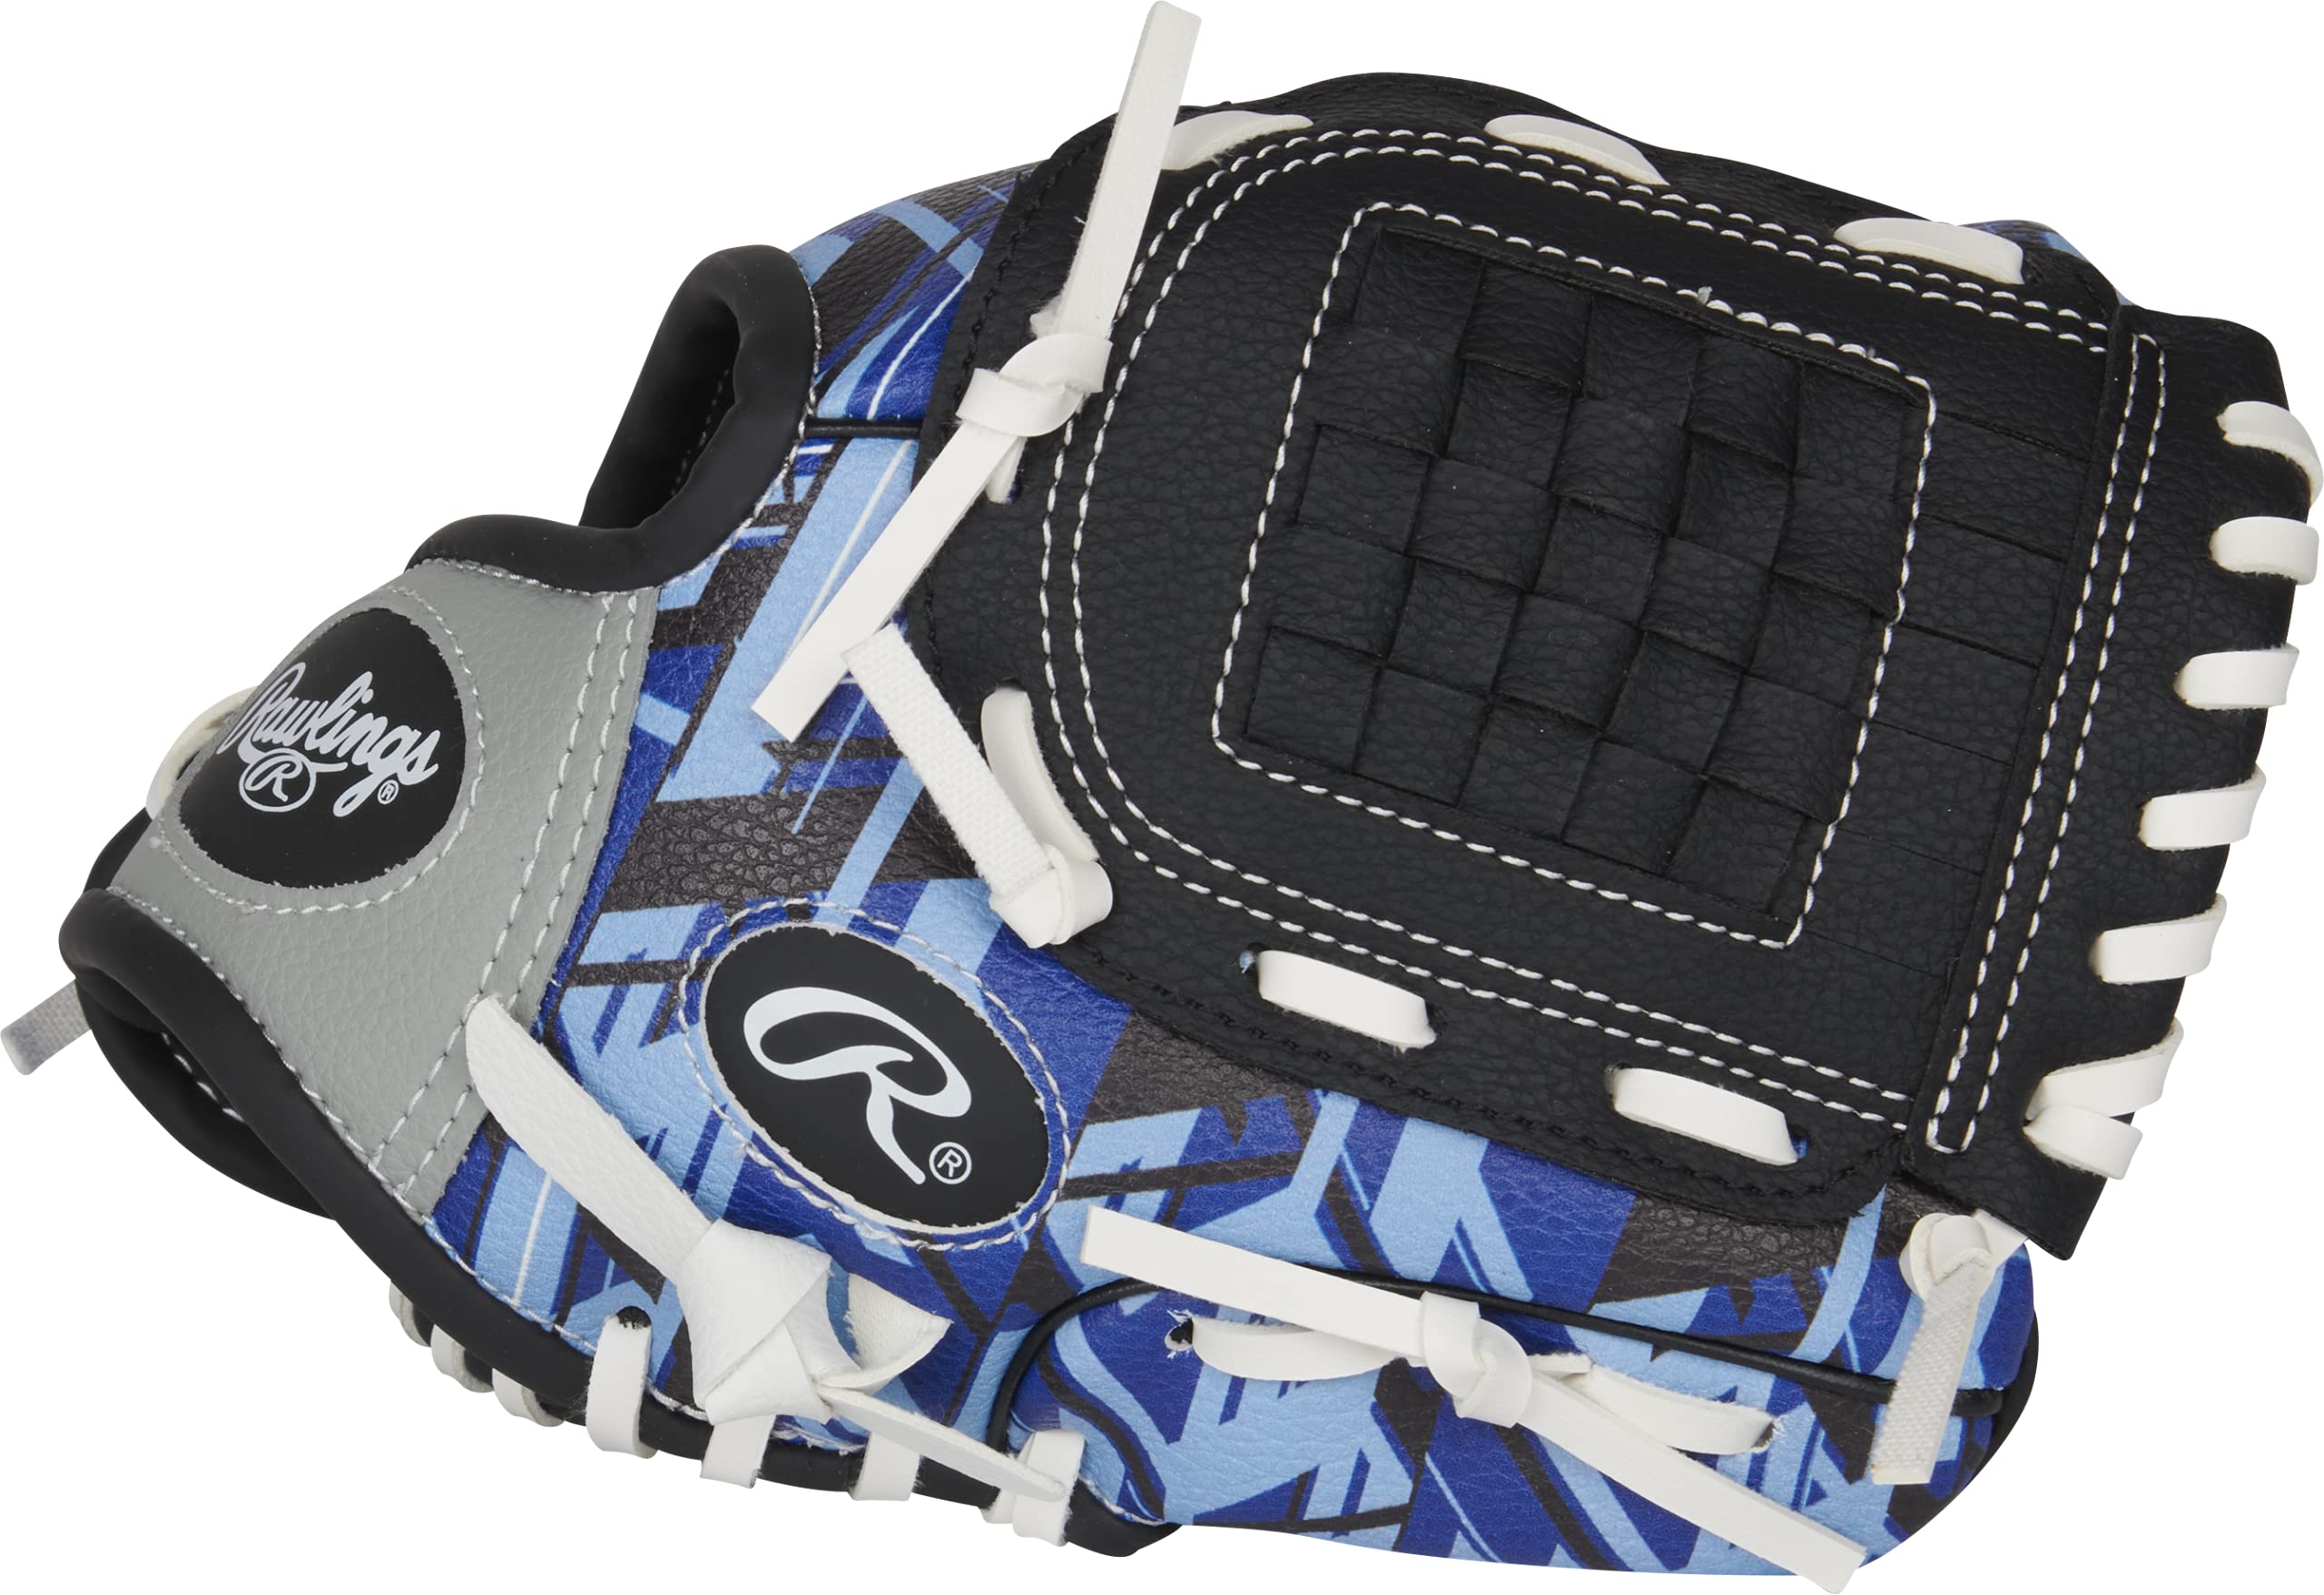 Rawlings Remix glove Series  T-Ball & Youth Baseball gloves  Left Hand Throw  9  Blue